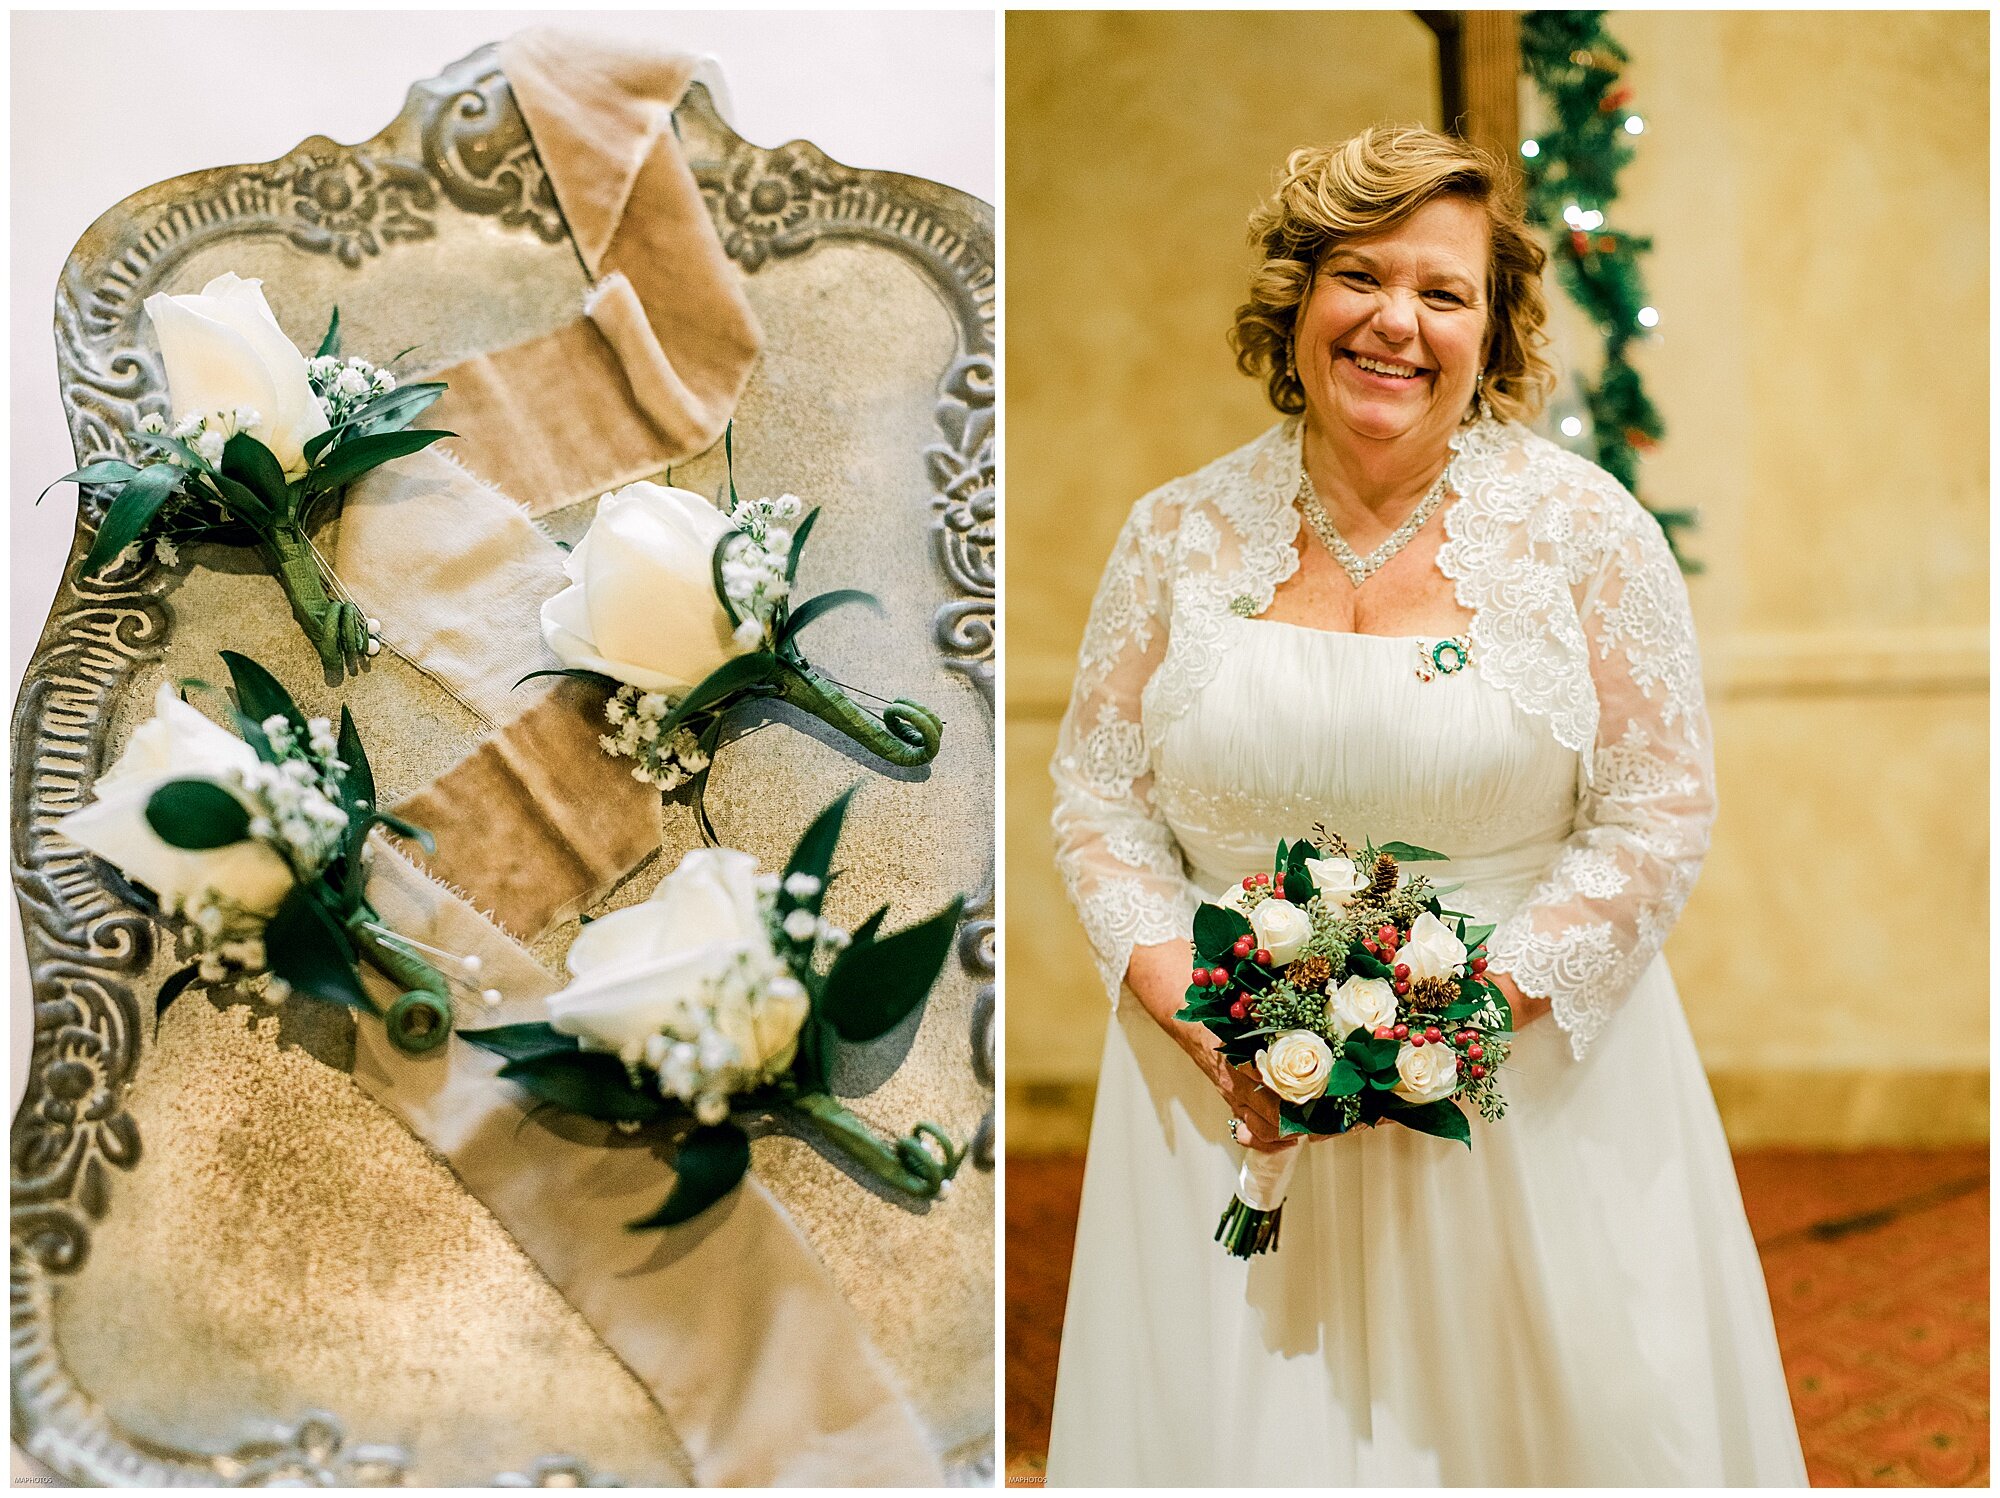 A Christmas Elopement at Brio in Cherry Hill NJ